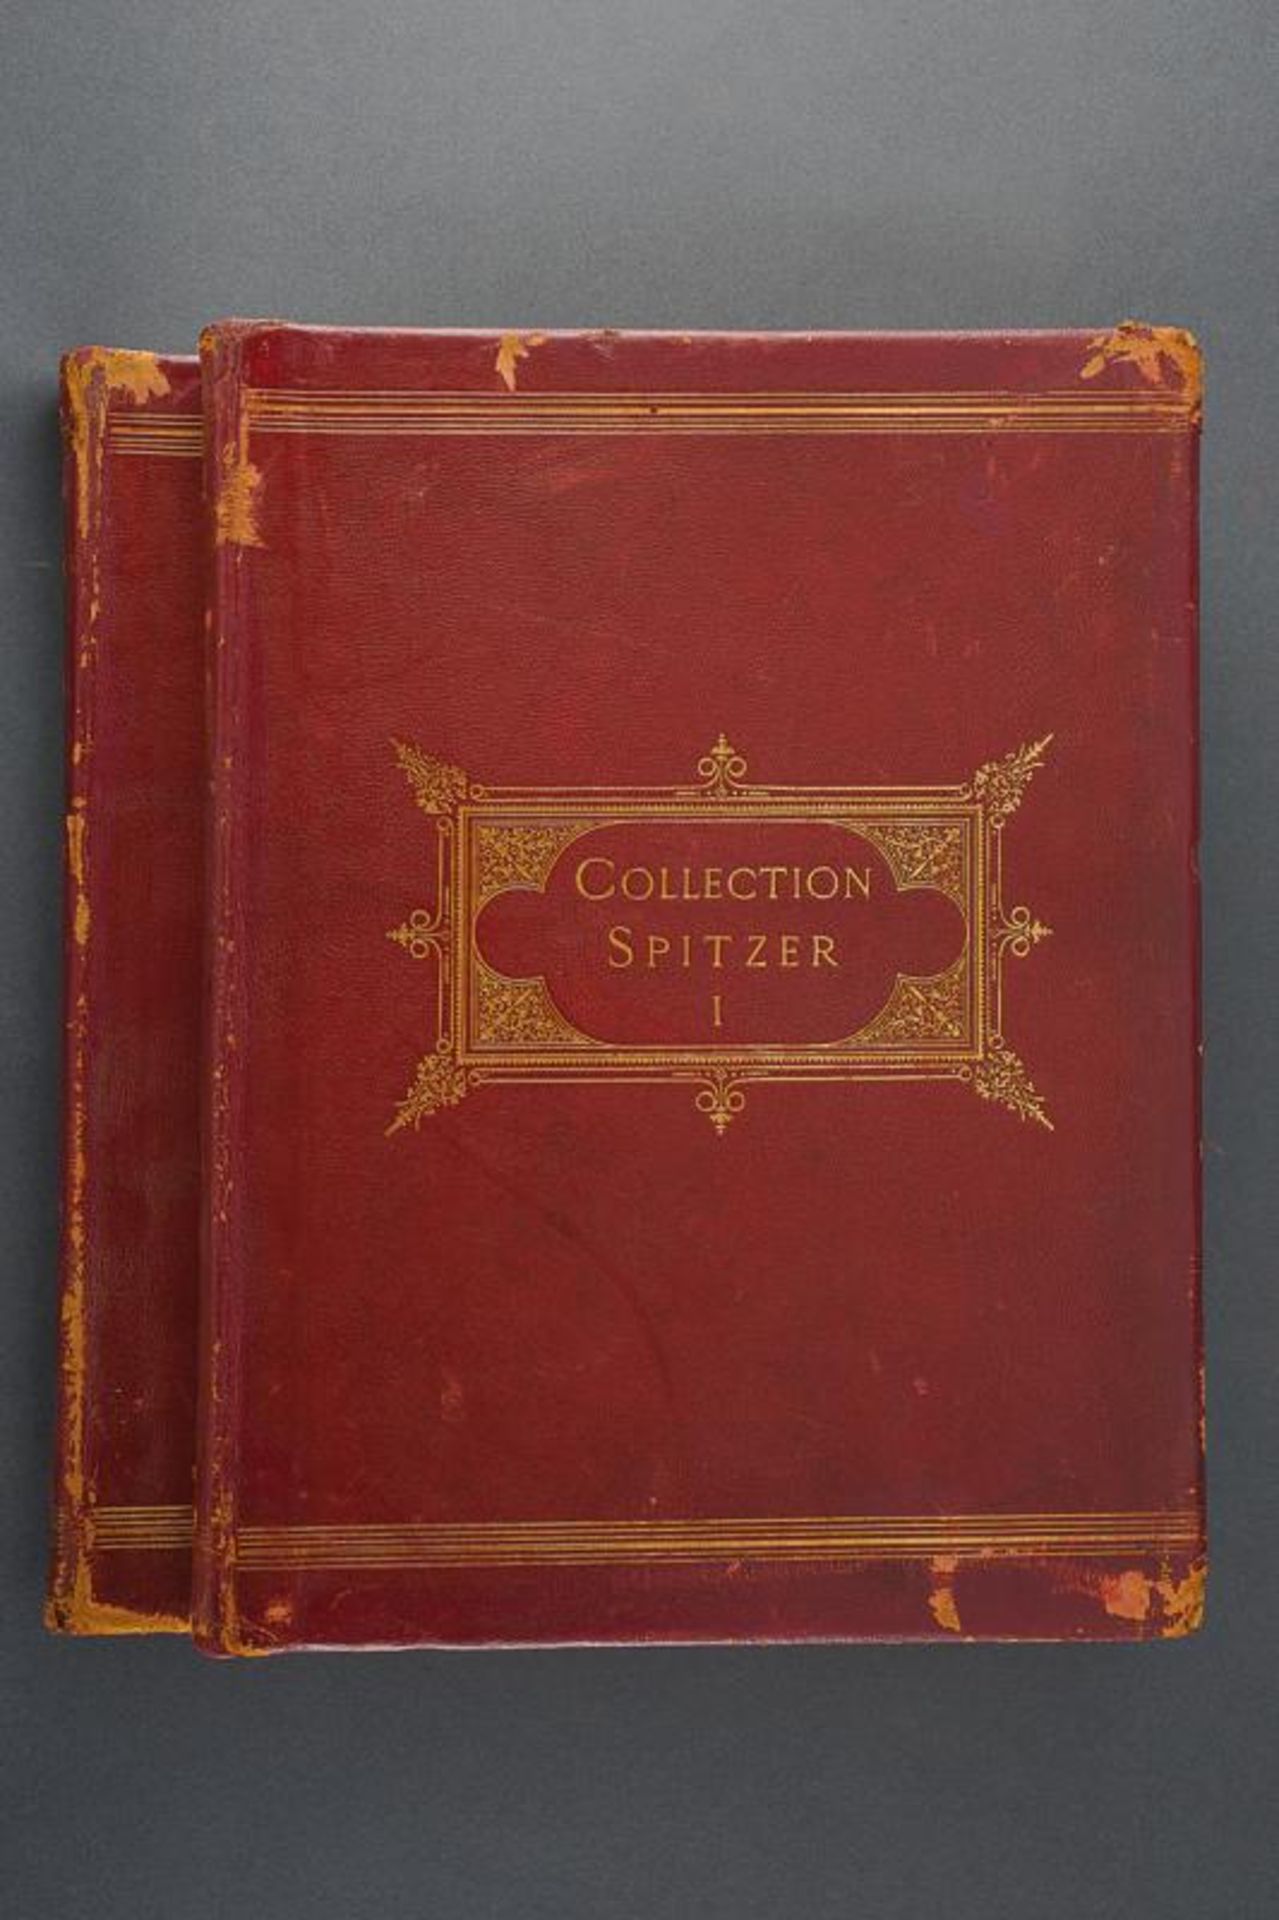 Collection Spitzer